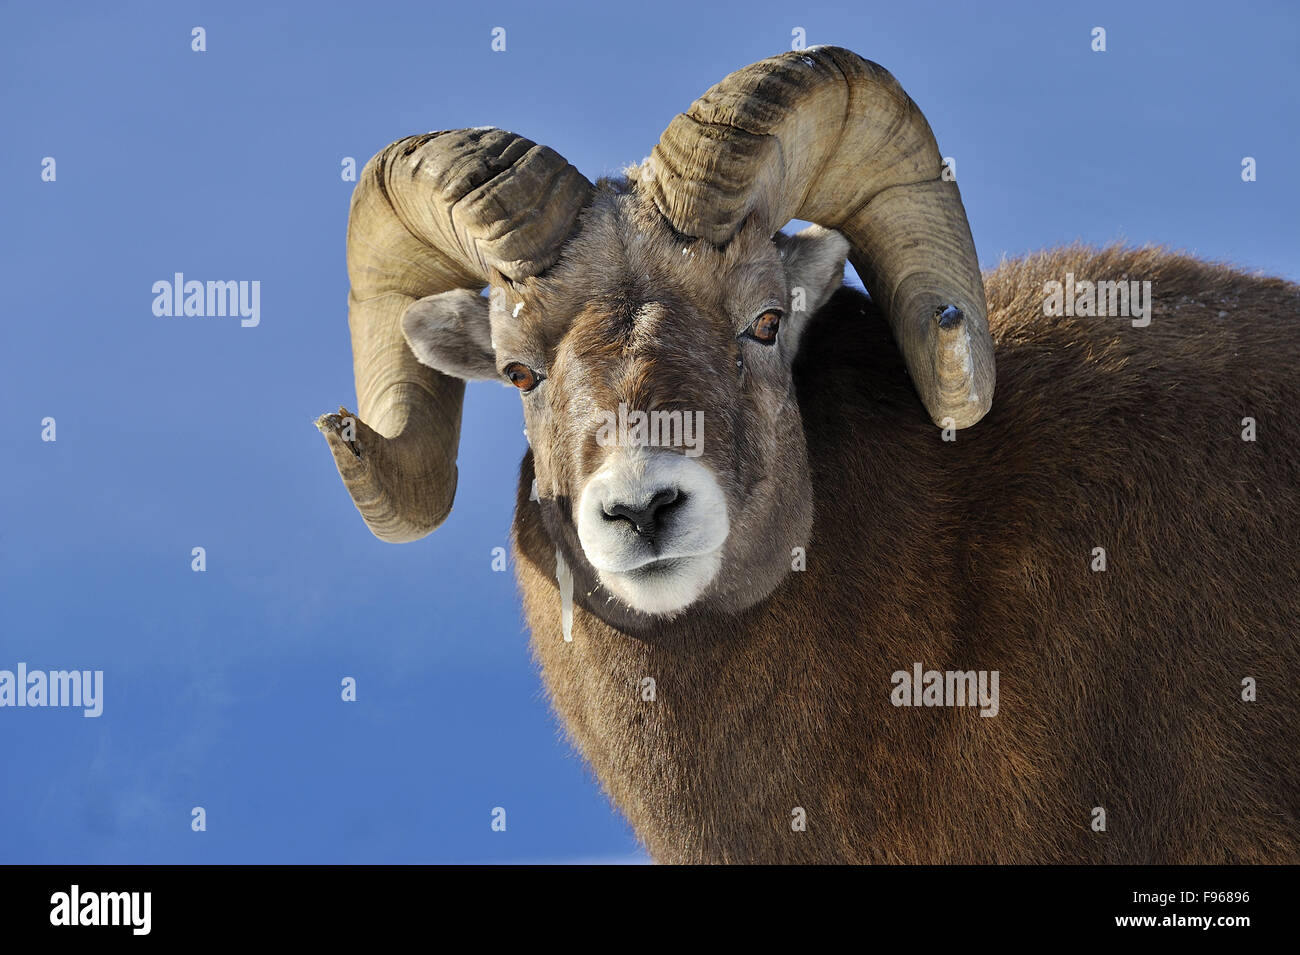 A close up front portrait view of a mature rocky mountain bighorn sheep, Orvis canadensis, looking forward. Stock Photo